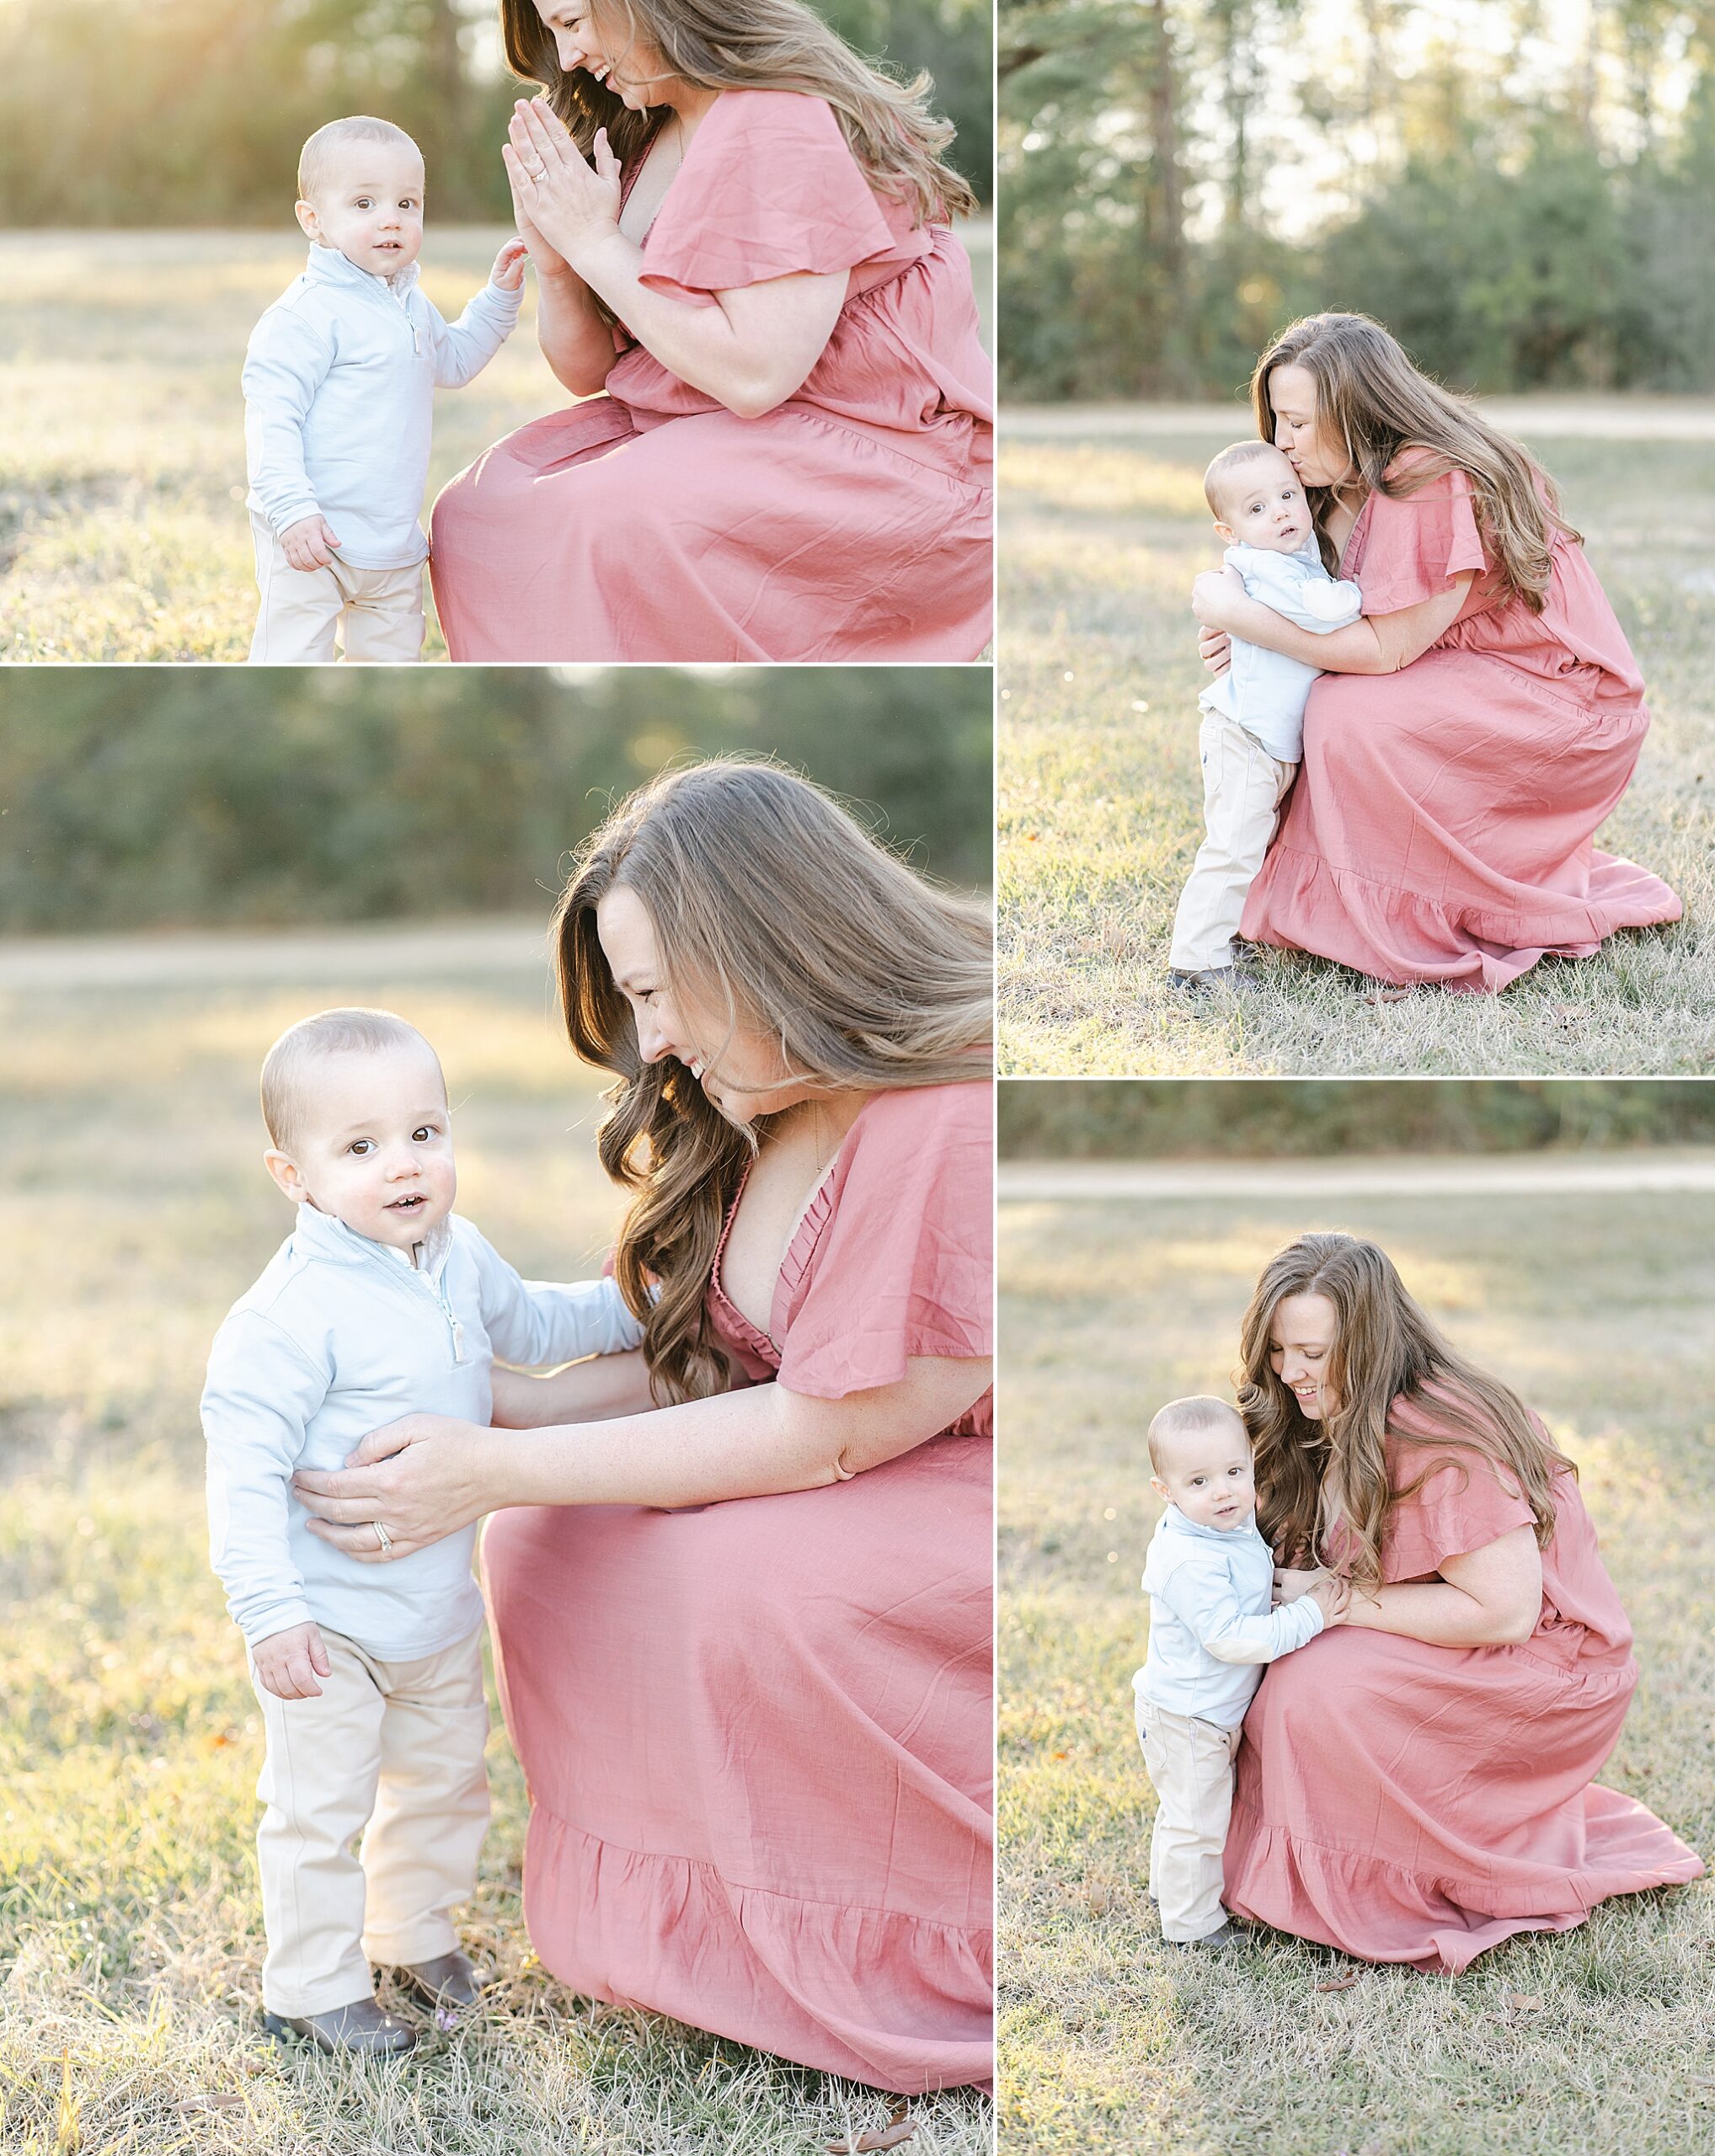 A mom and one year old baby boy play together during their outdoor family session in Hattiesburg, MS with Emily Lofton Photography.